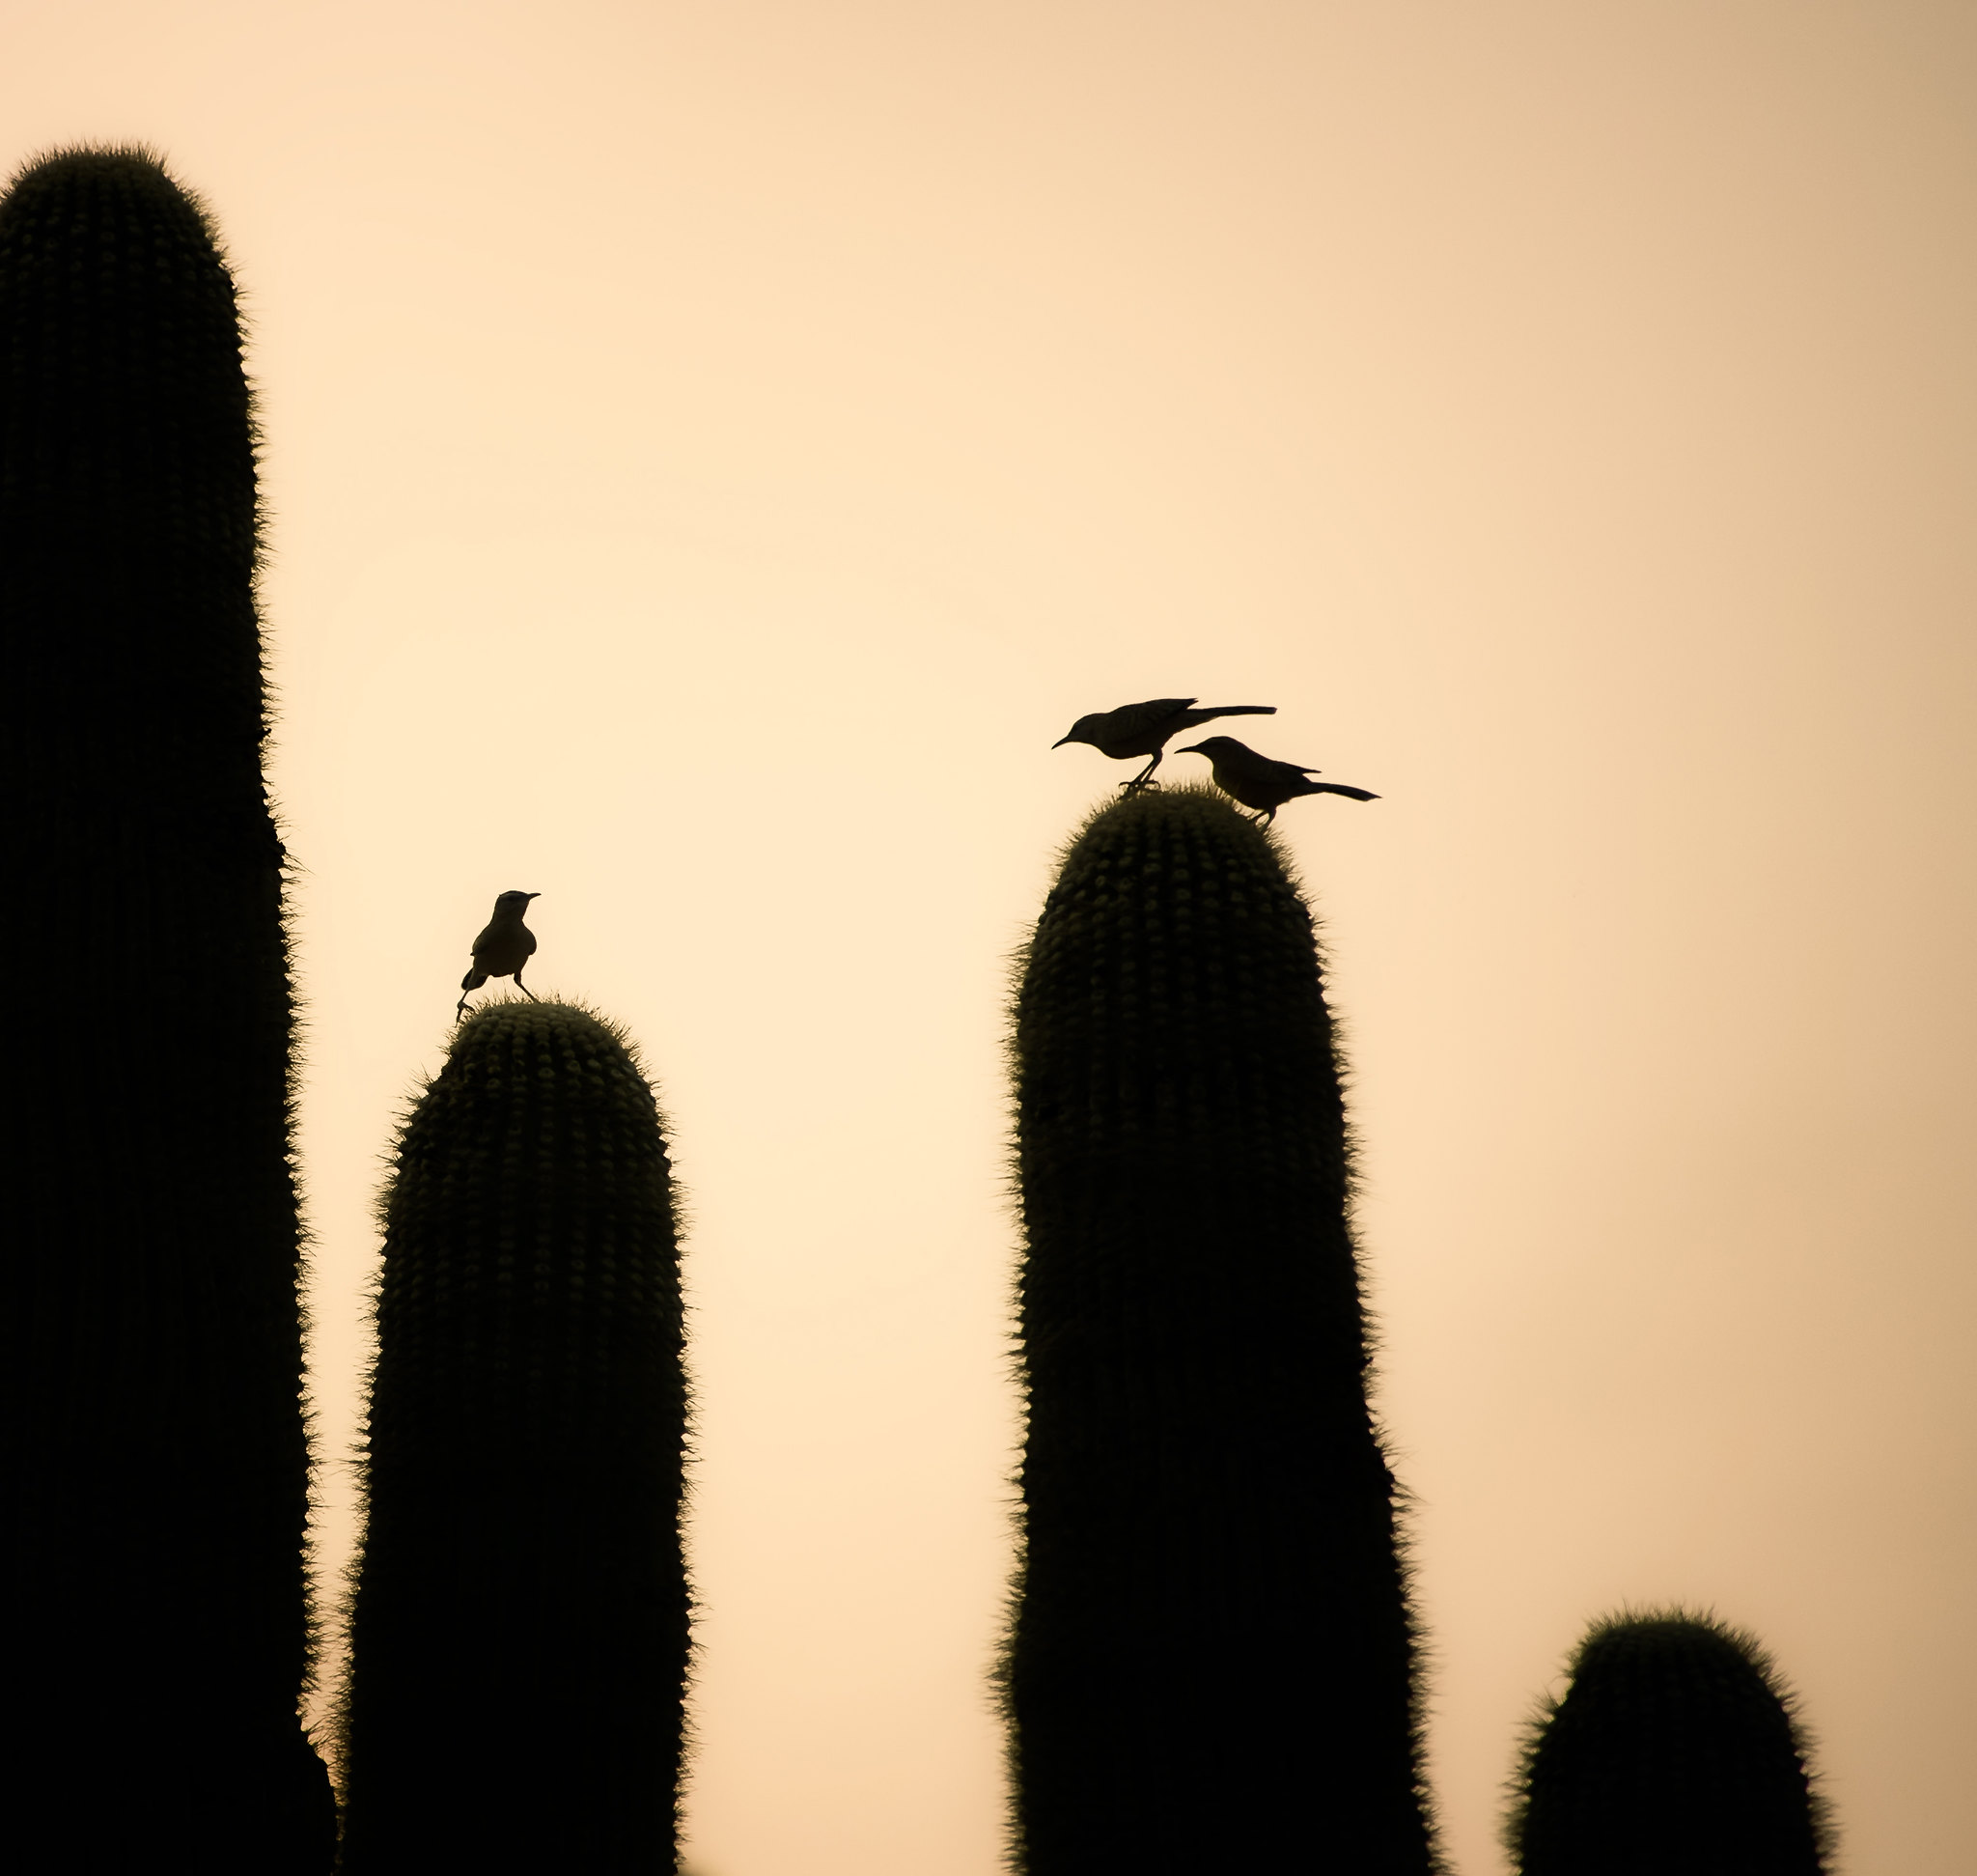 Photo by Michael Wilson  |  Silhouettes of Arizona's state bird at sunset